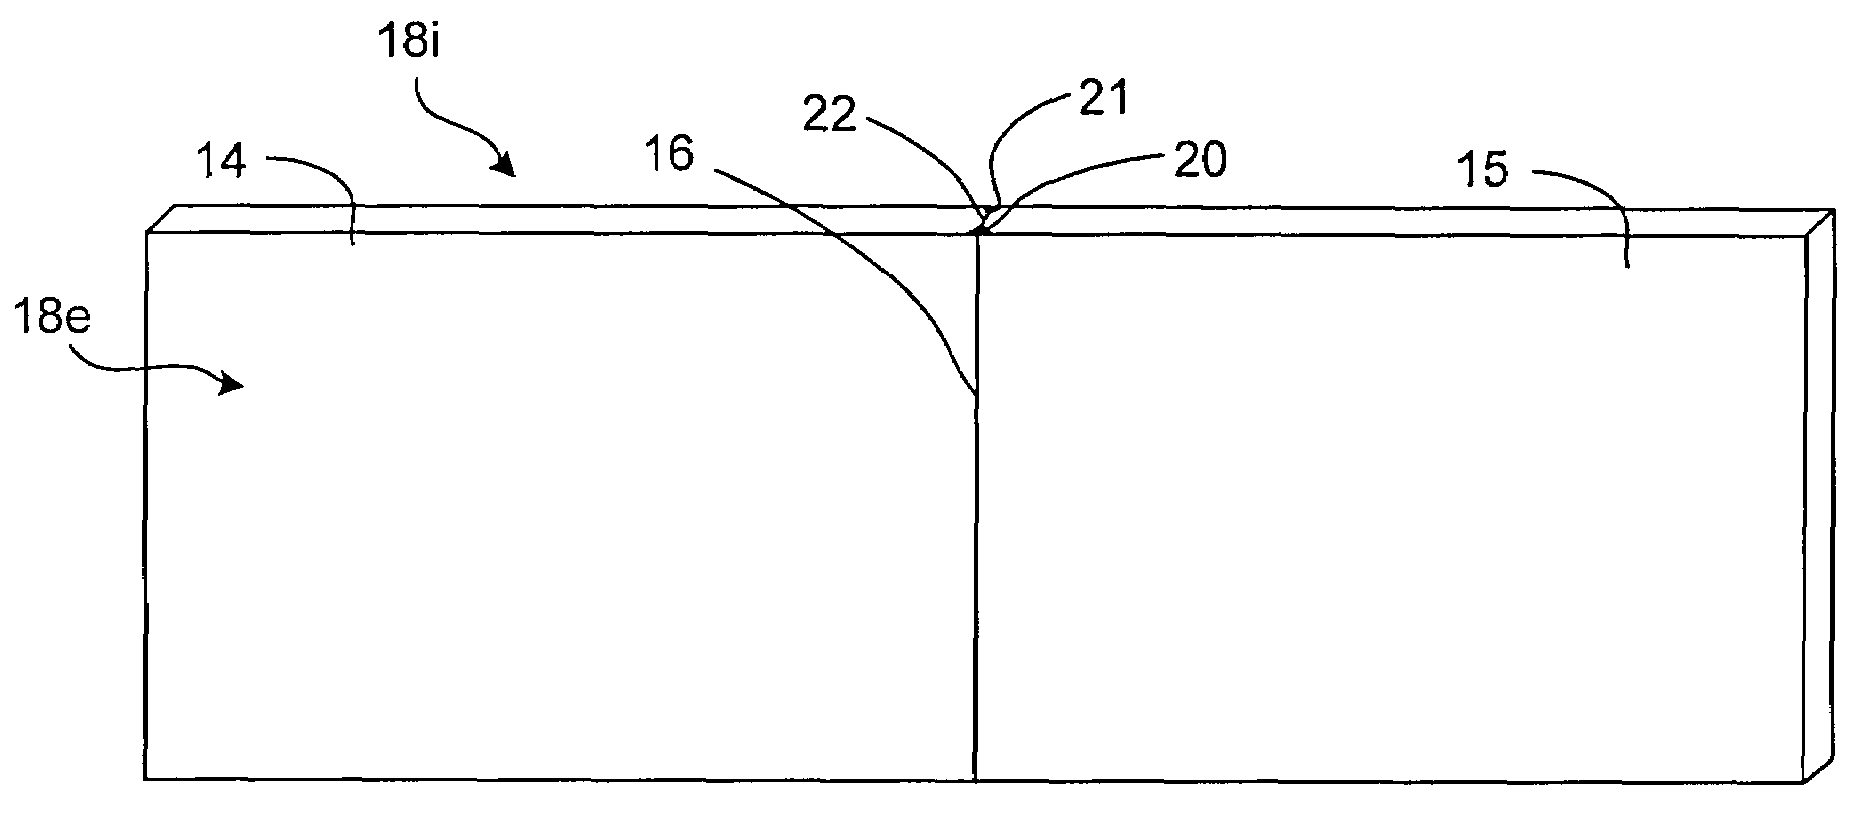 Straight joint for sandwich panels and method of fabricating same